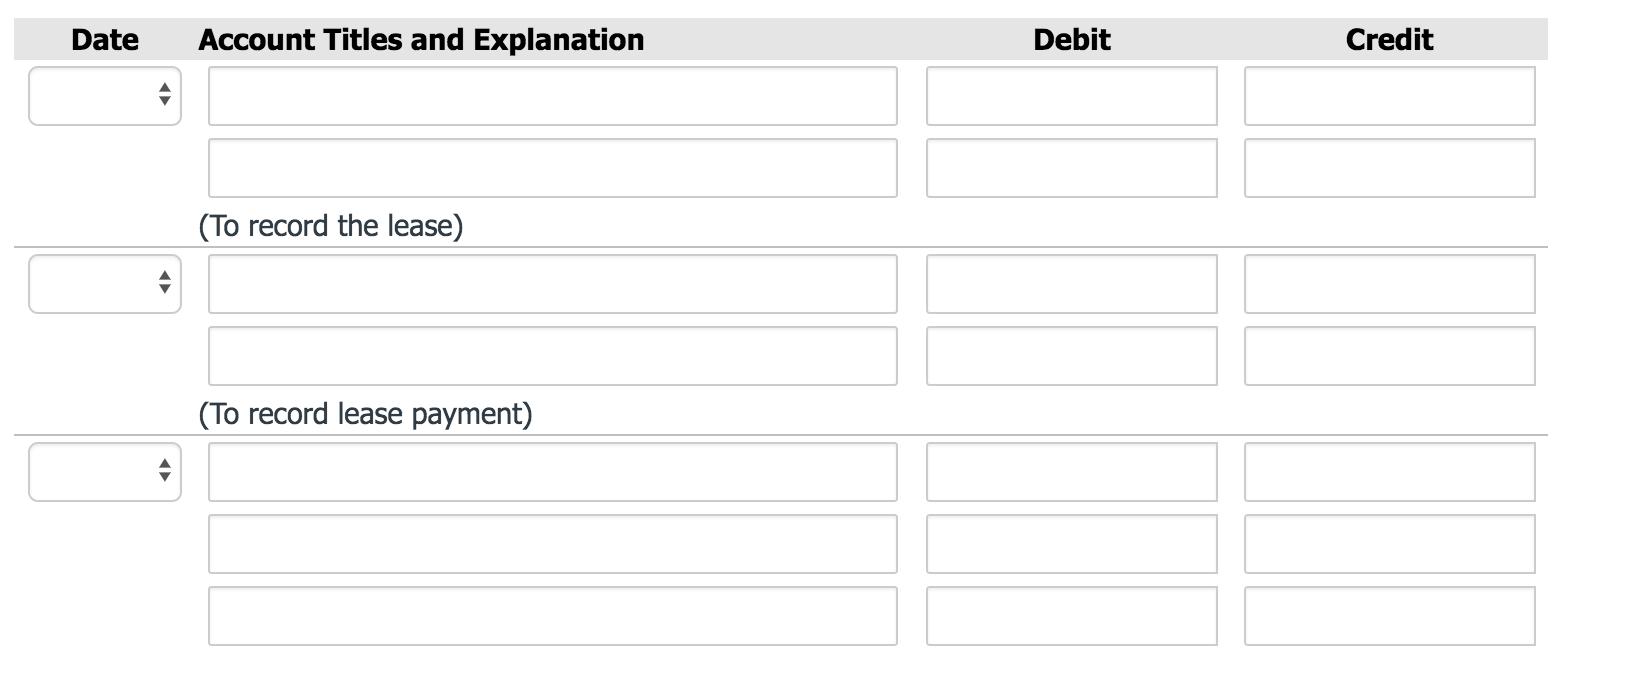 Account Titles and Explanation Debit Credit Date (To record the lease) (To record lease payment)